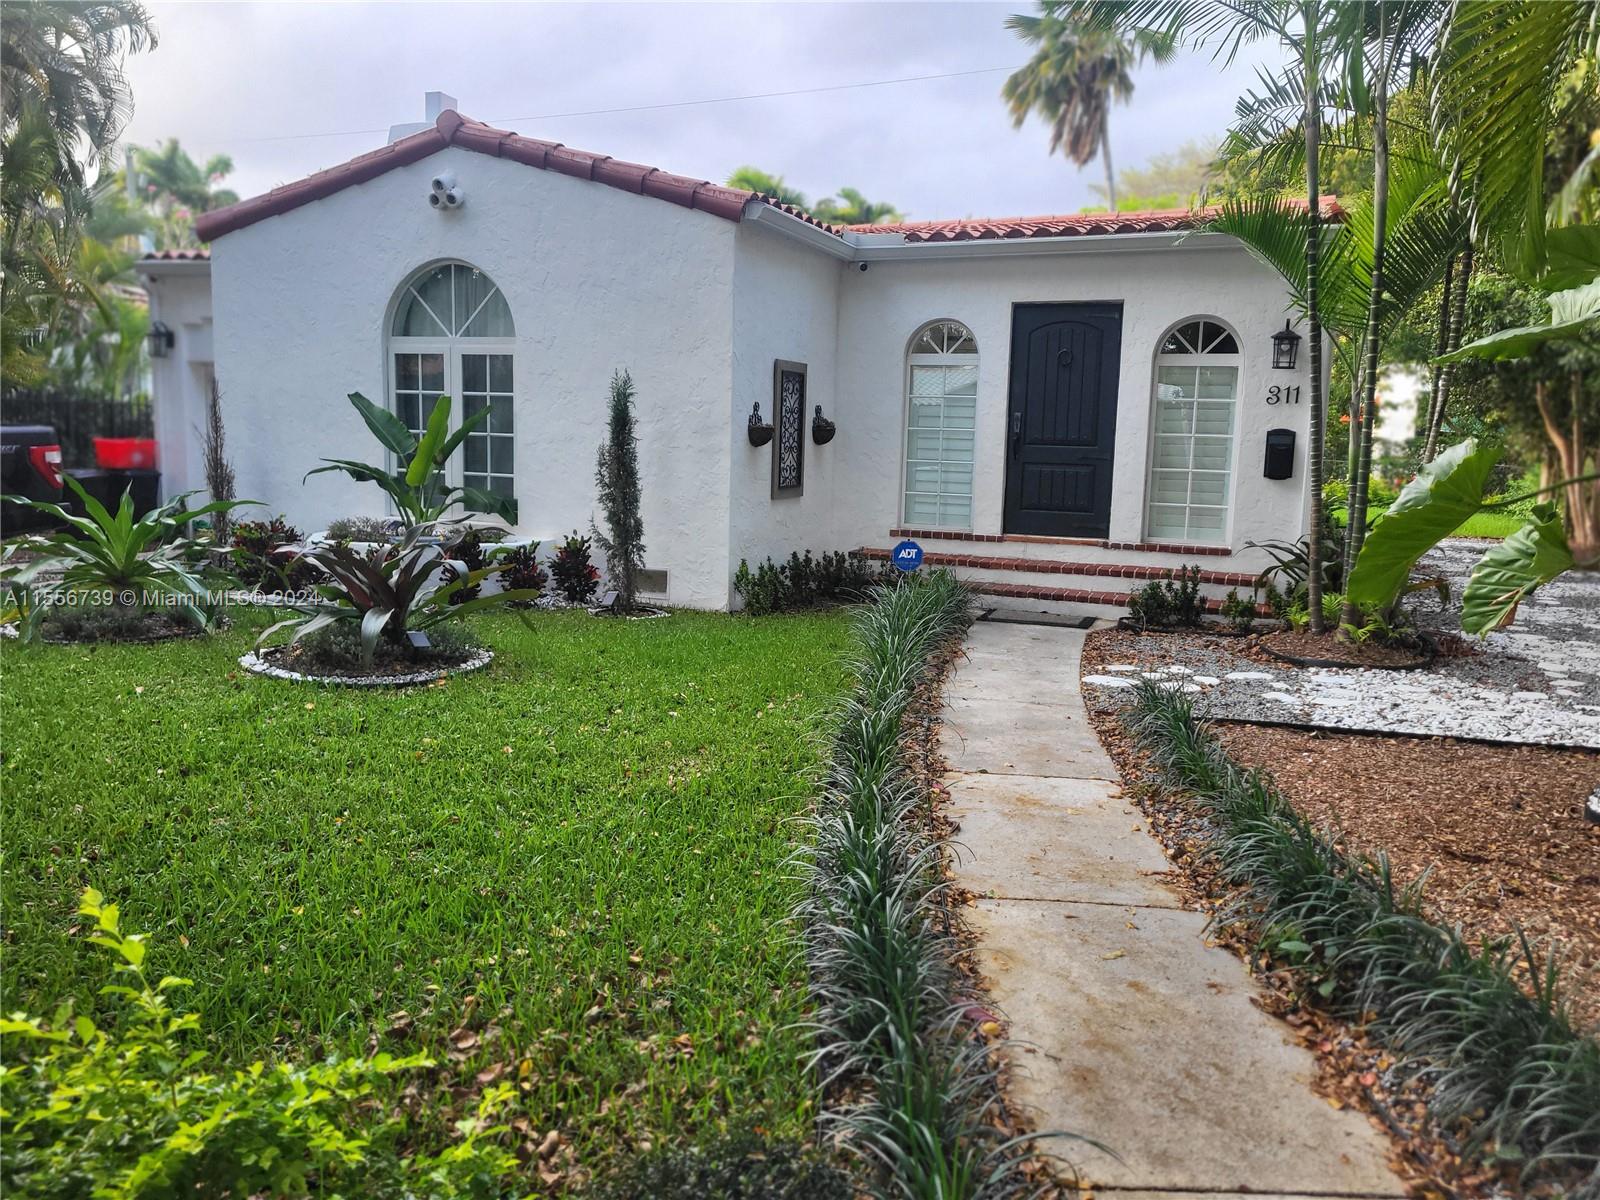 Step back in time to the charm and elegance of 1938 with this Classic Spanish home in the heart of Coral Gables. Conveniently located just a short walk from Merrick Park, Miracle Mile, and Coral Gables' finest restaurants, shops, and cultural attractions. Boasting original architectural details and recent modern updates, this timeless home offers a perfect blend of old-world character and contemporary comforts.  Embrace the allure of classic Spanish architecture with features such as a cozy fireplace, beamed ceilings, and original refinished hardwood floors as well impact windows and doors and exterior resurfacing. This home has been updated to modernize the kitchen and bathrooms with classic finishes.